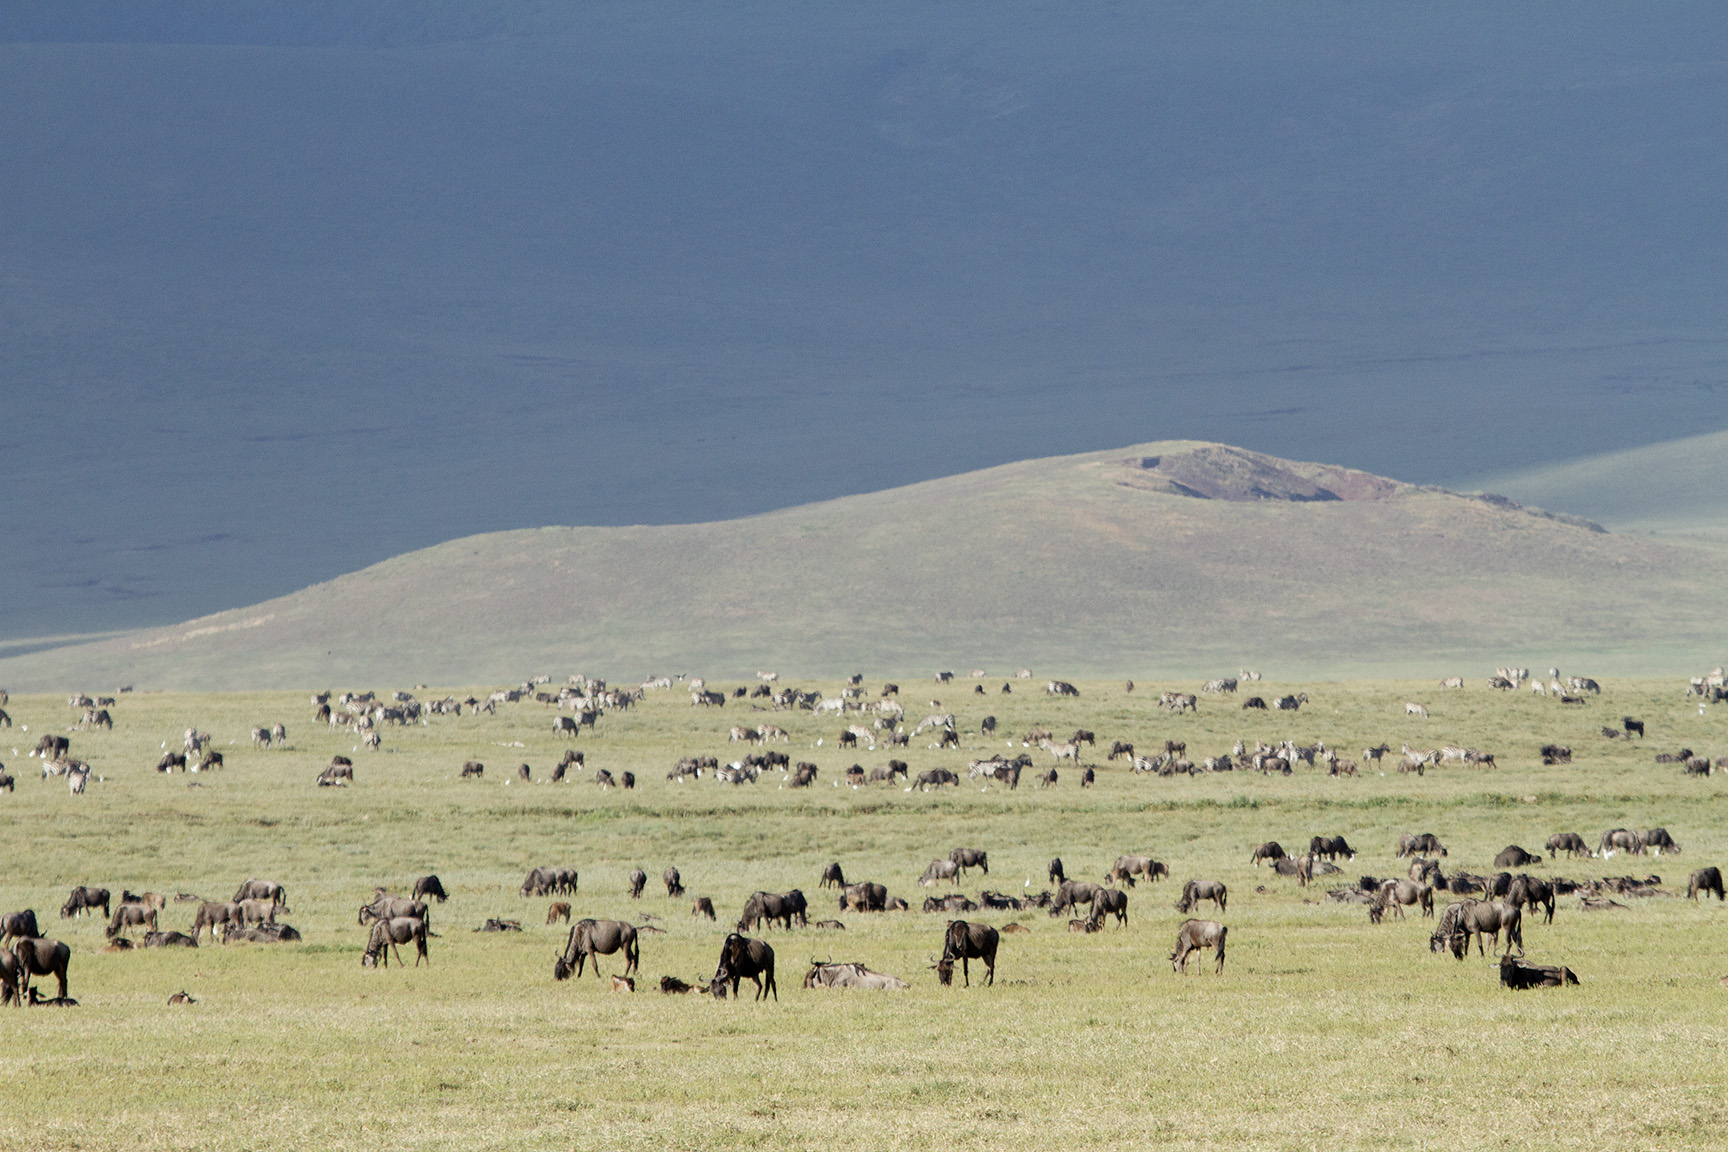 A part of a wildebeest herd grazing on the plains in the Ngorongoro Crater